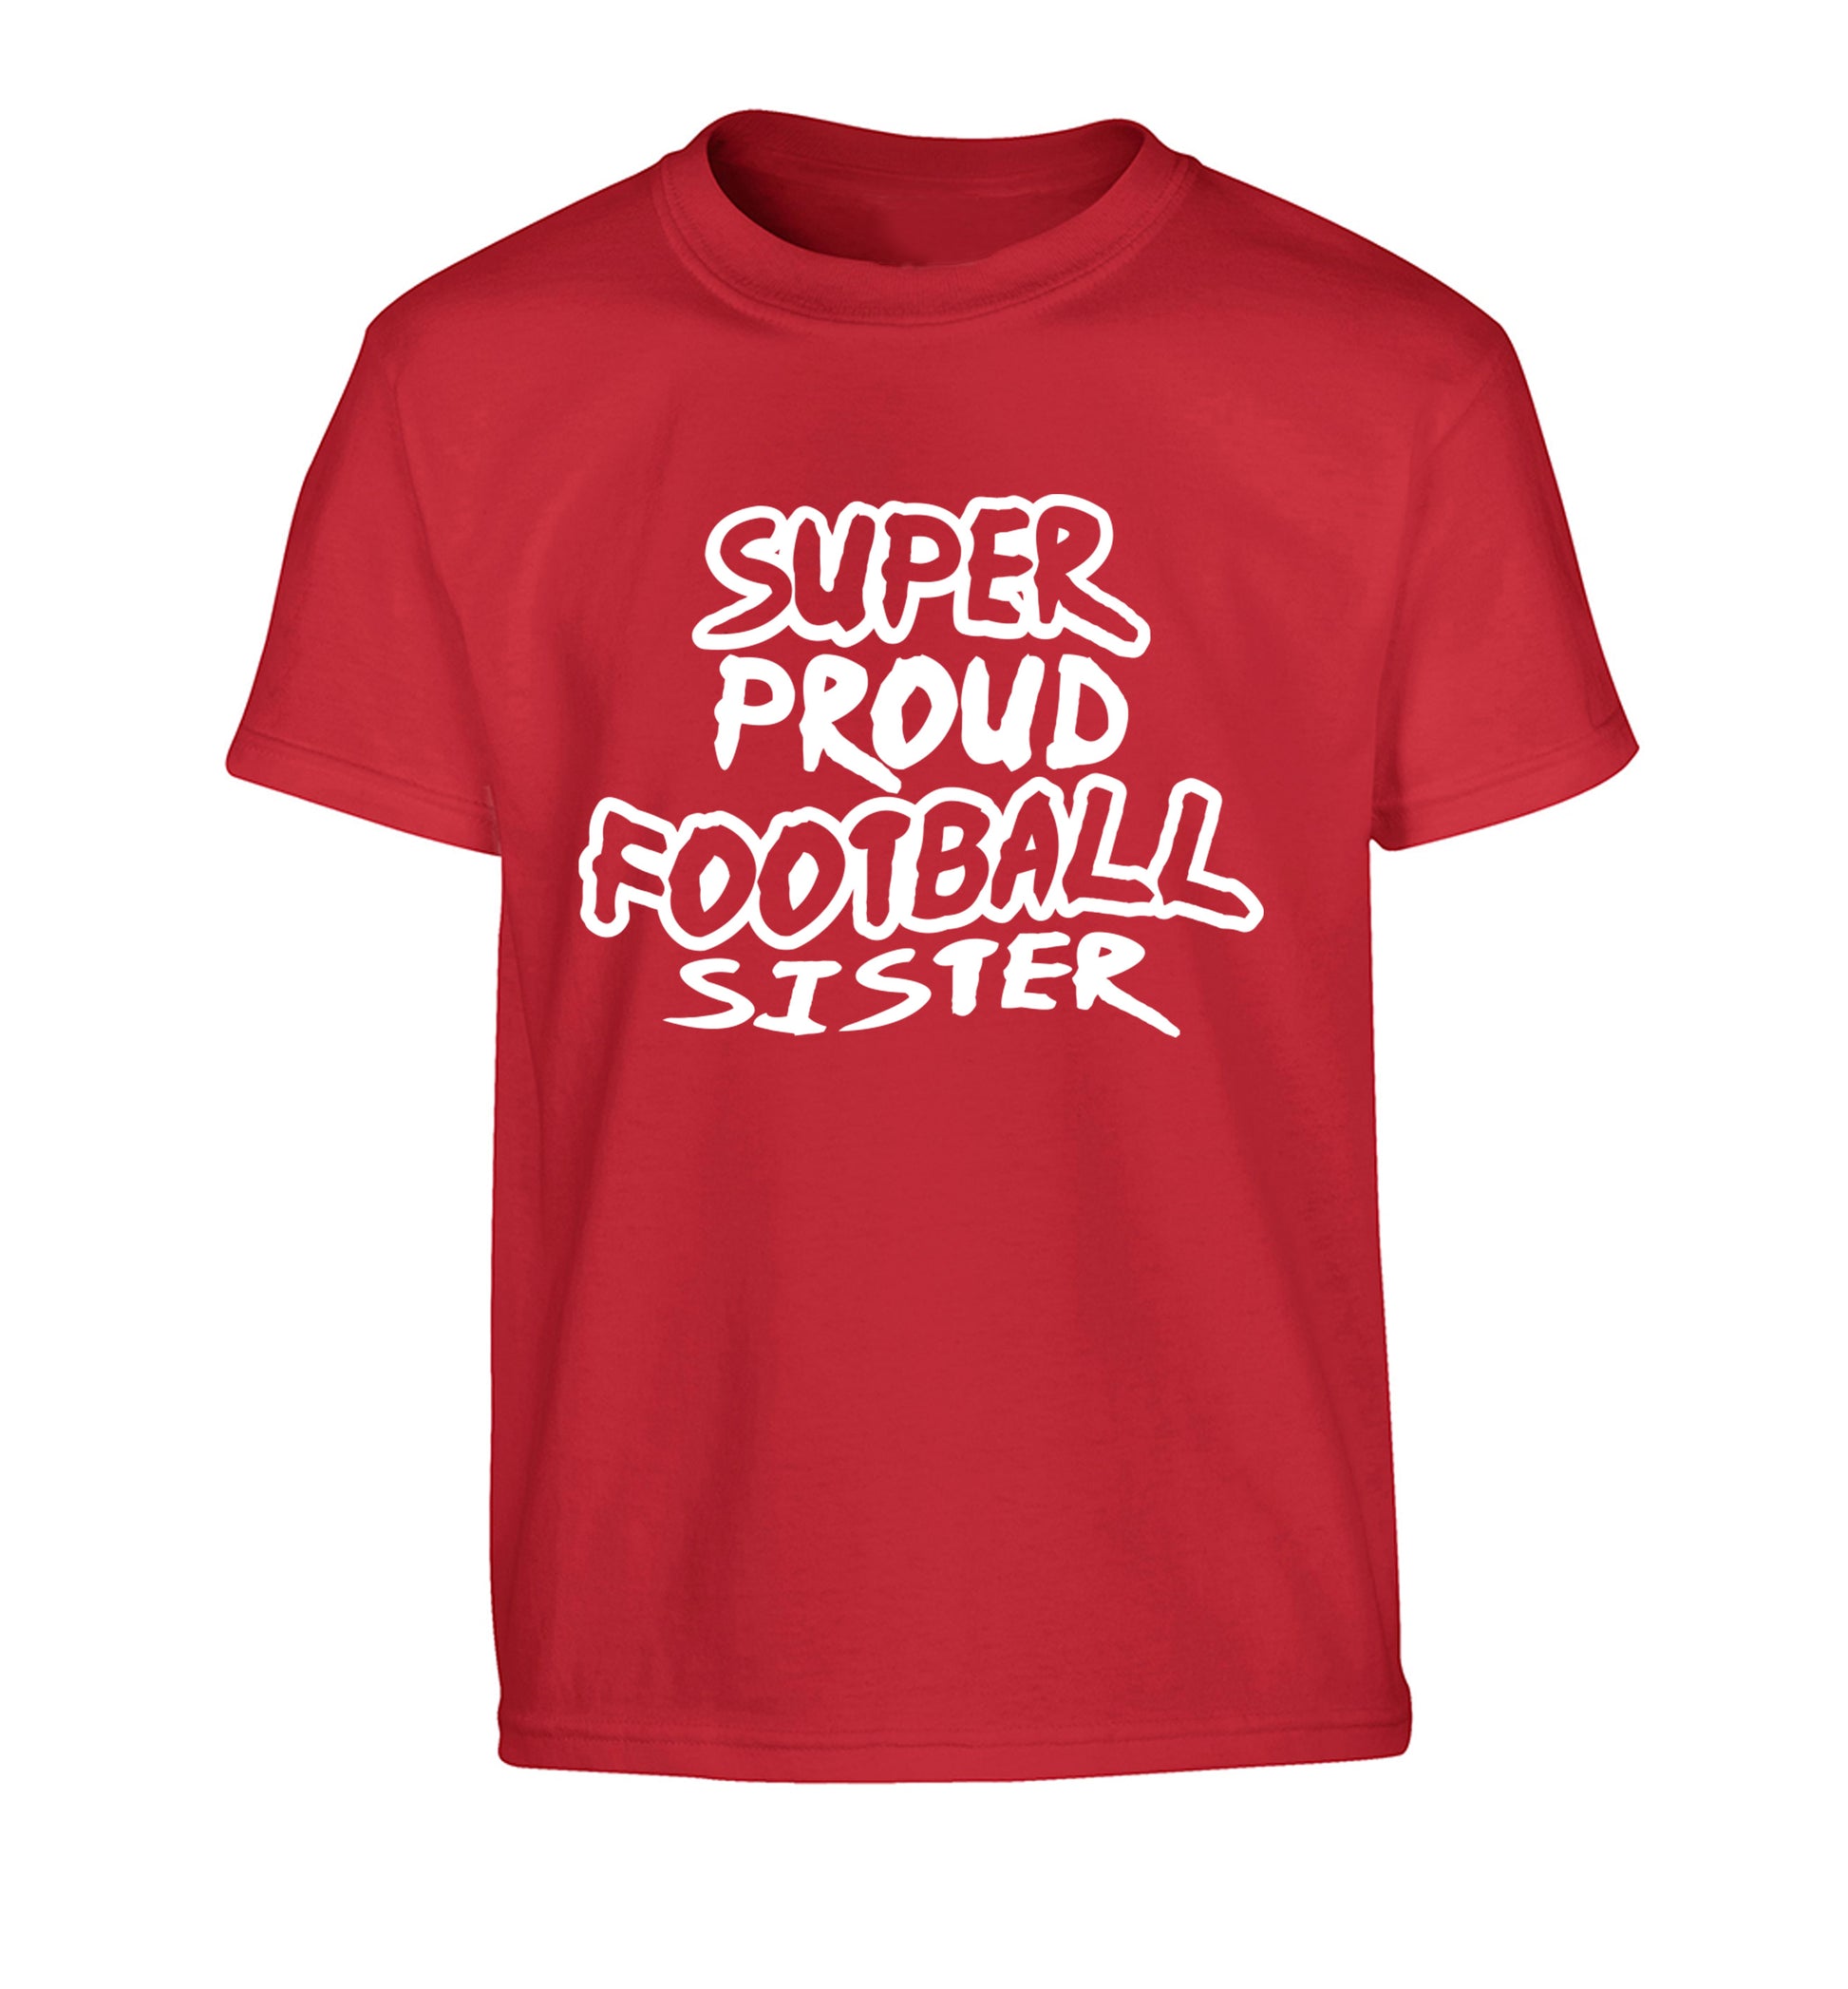 Super proud football sister Children's red Tshirt 12-14 Years